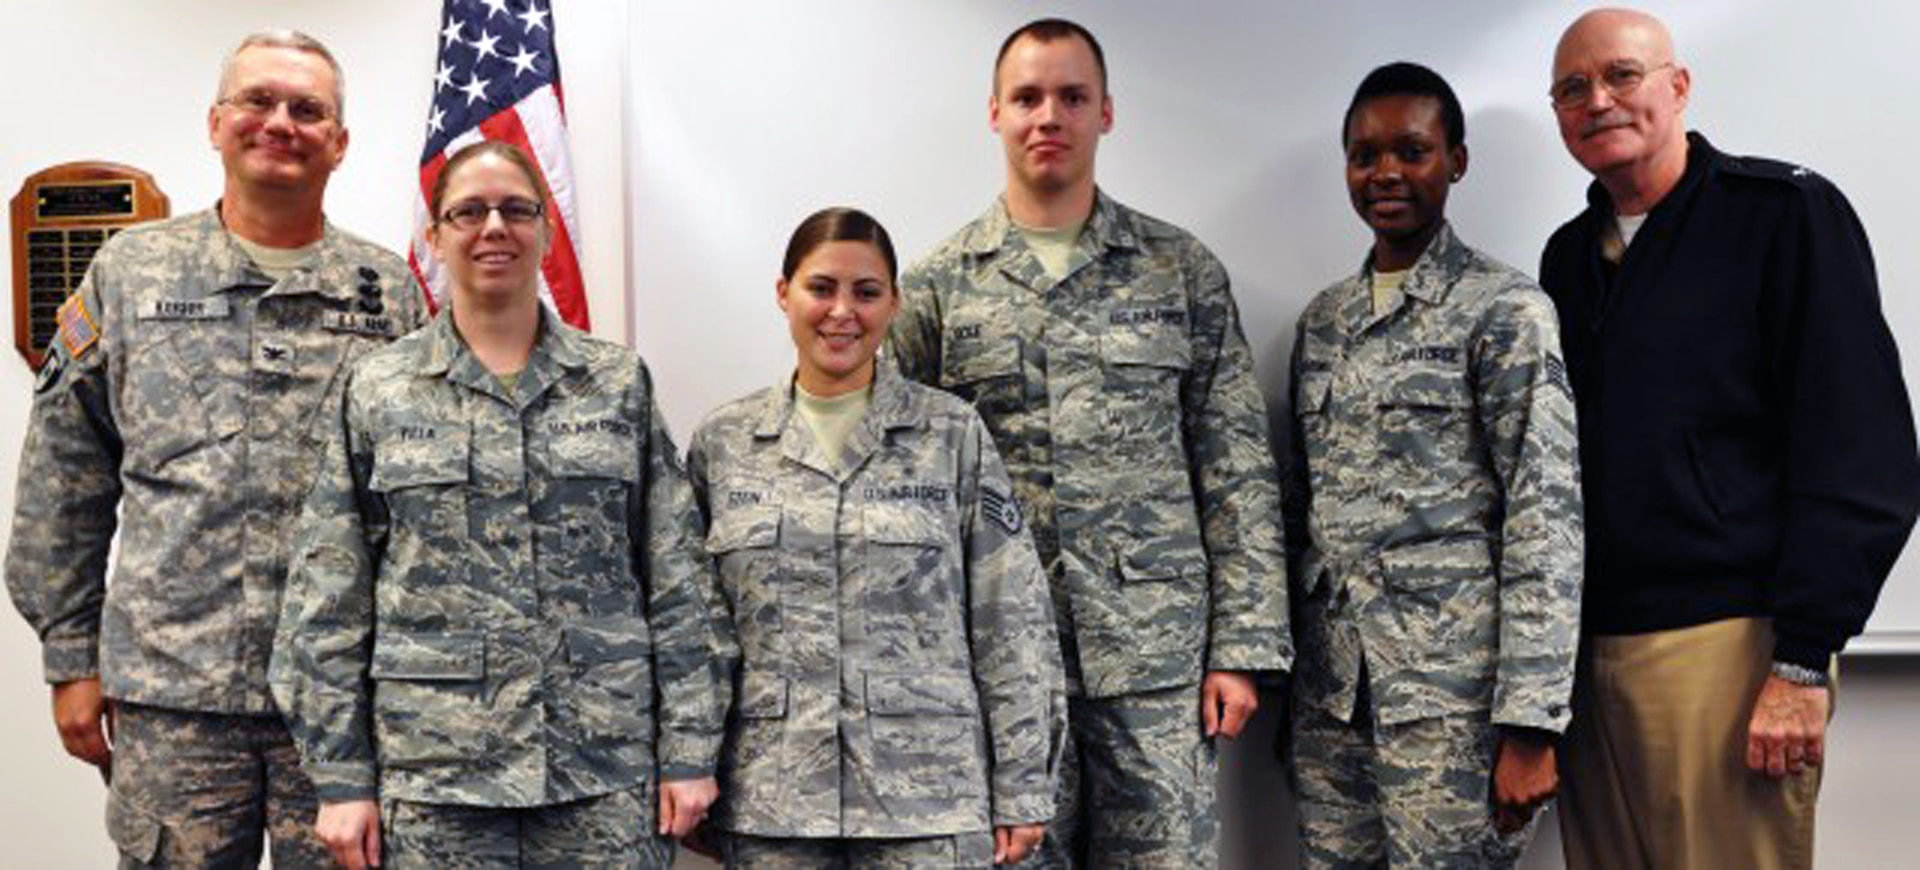 The first Medical Education and Training Campus graduates were four Air Force students who completed a two-week pharmacy craftsman course that was required for advancement. The course was previously taught at Sheppard Air Force Base in Wichita Falls, Texas, and became a joint-service course following the move to METC.